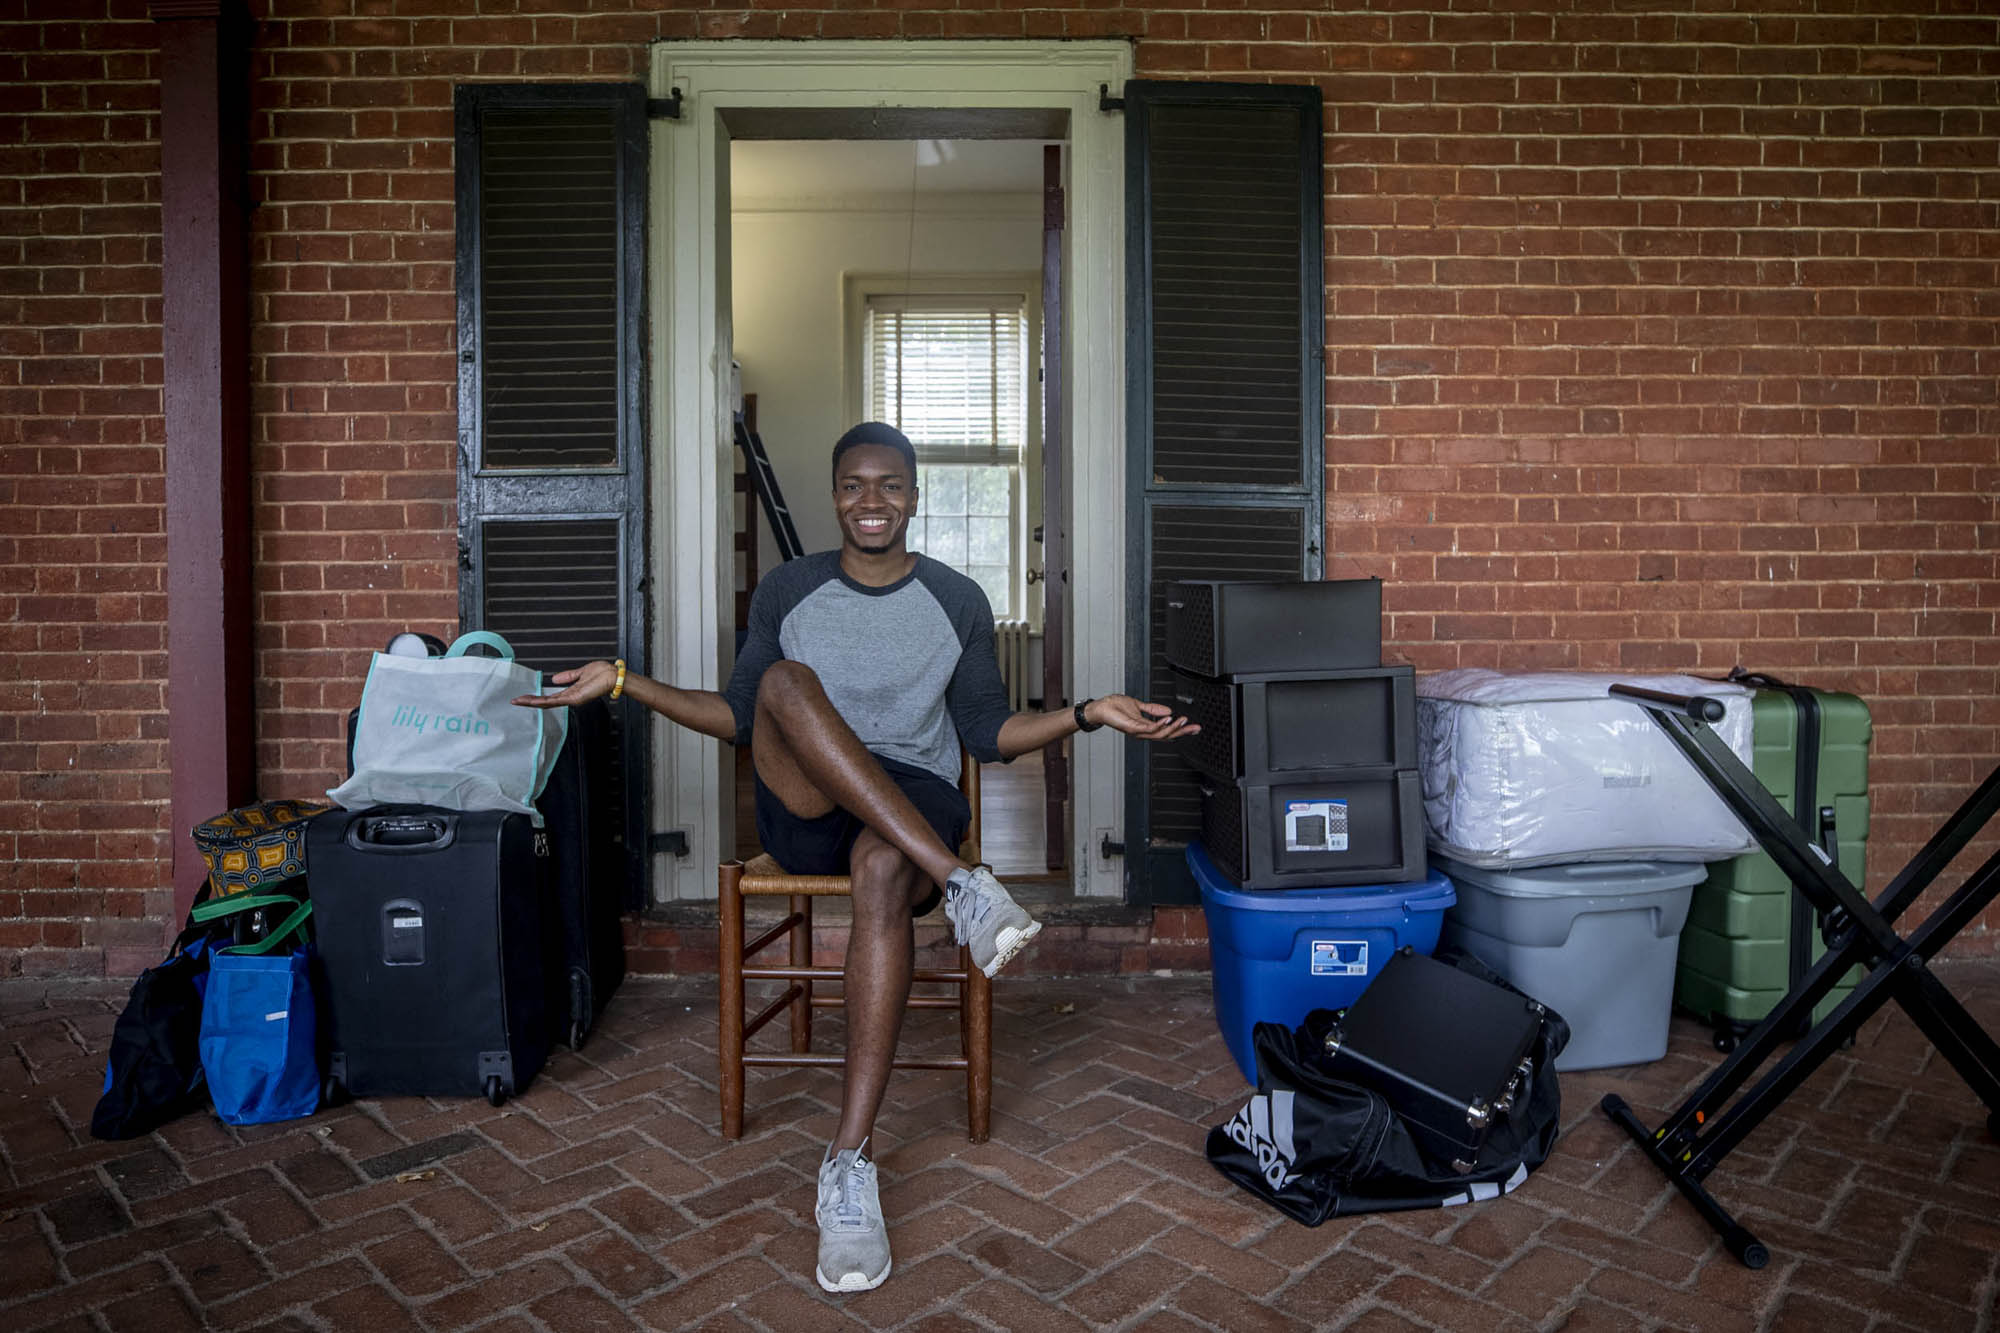 Nathan John sits in front of his room on the Lawn with his personal belongings on the sidewalk before moving in